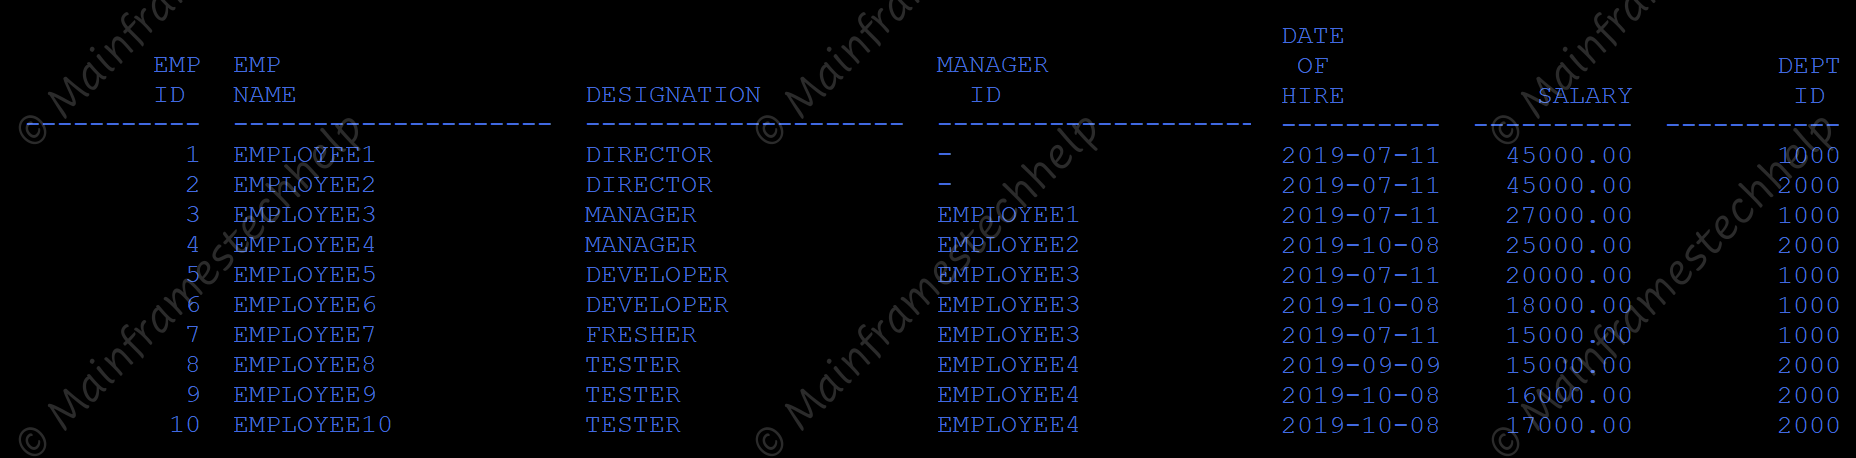 employee_details table